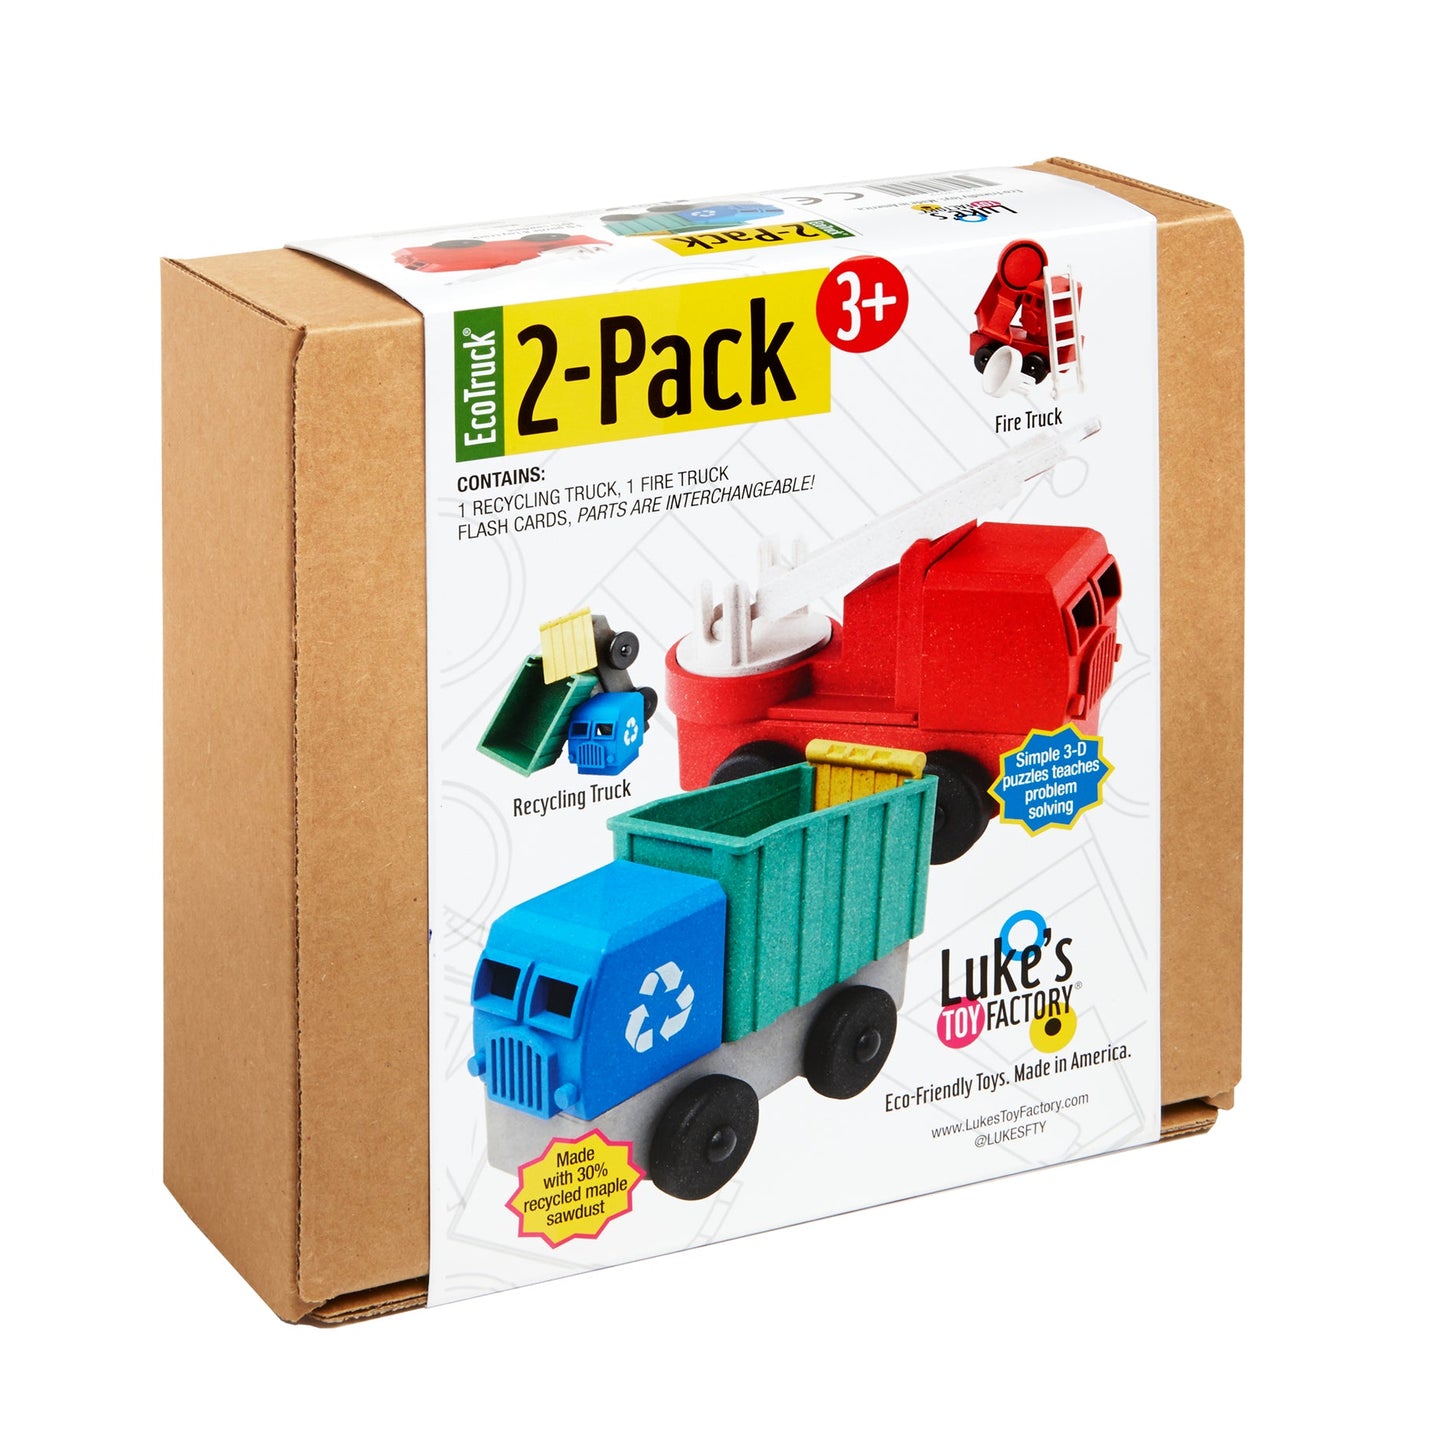 Fire and Recycling Truck (2 Pack)